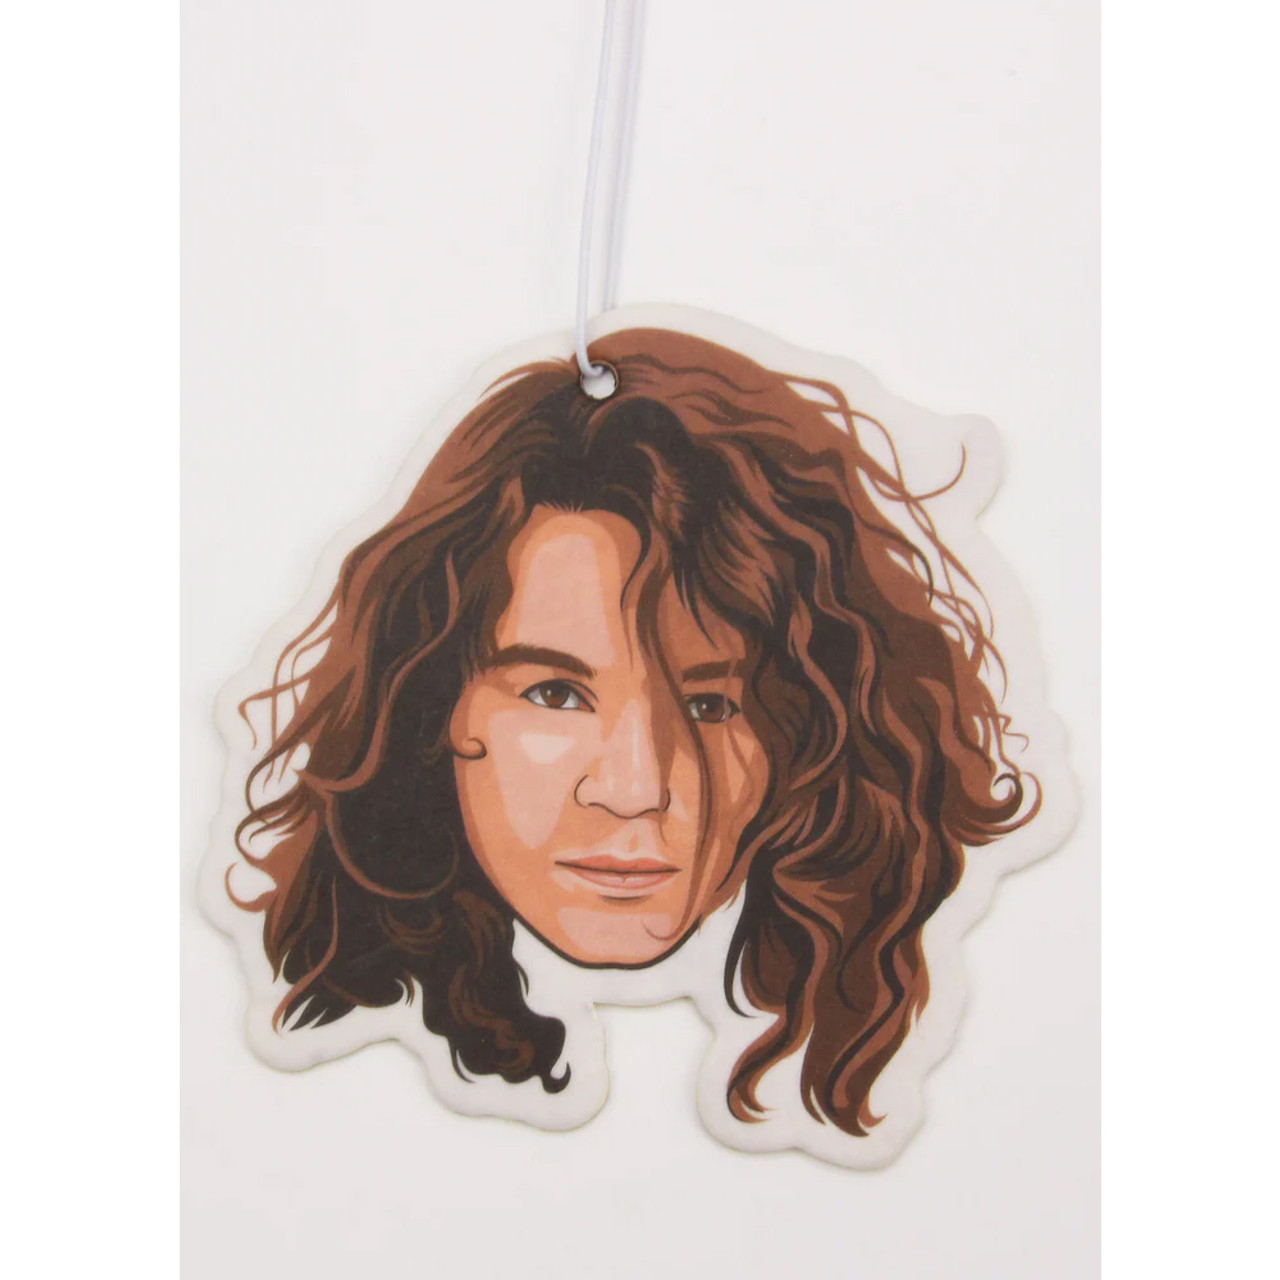 SMELL THE FUN Hutchence Air Freshener Cologne